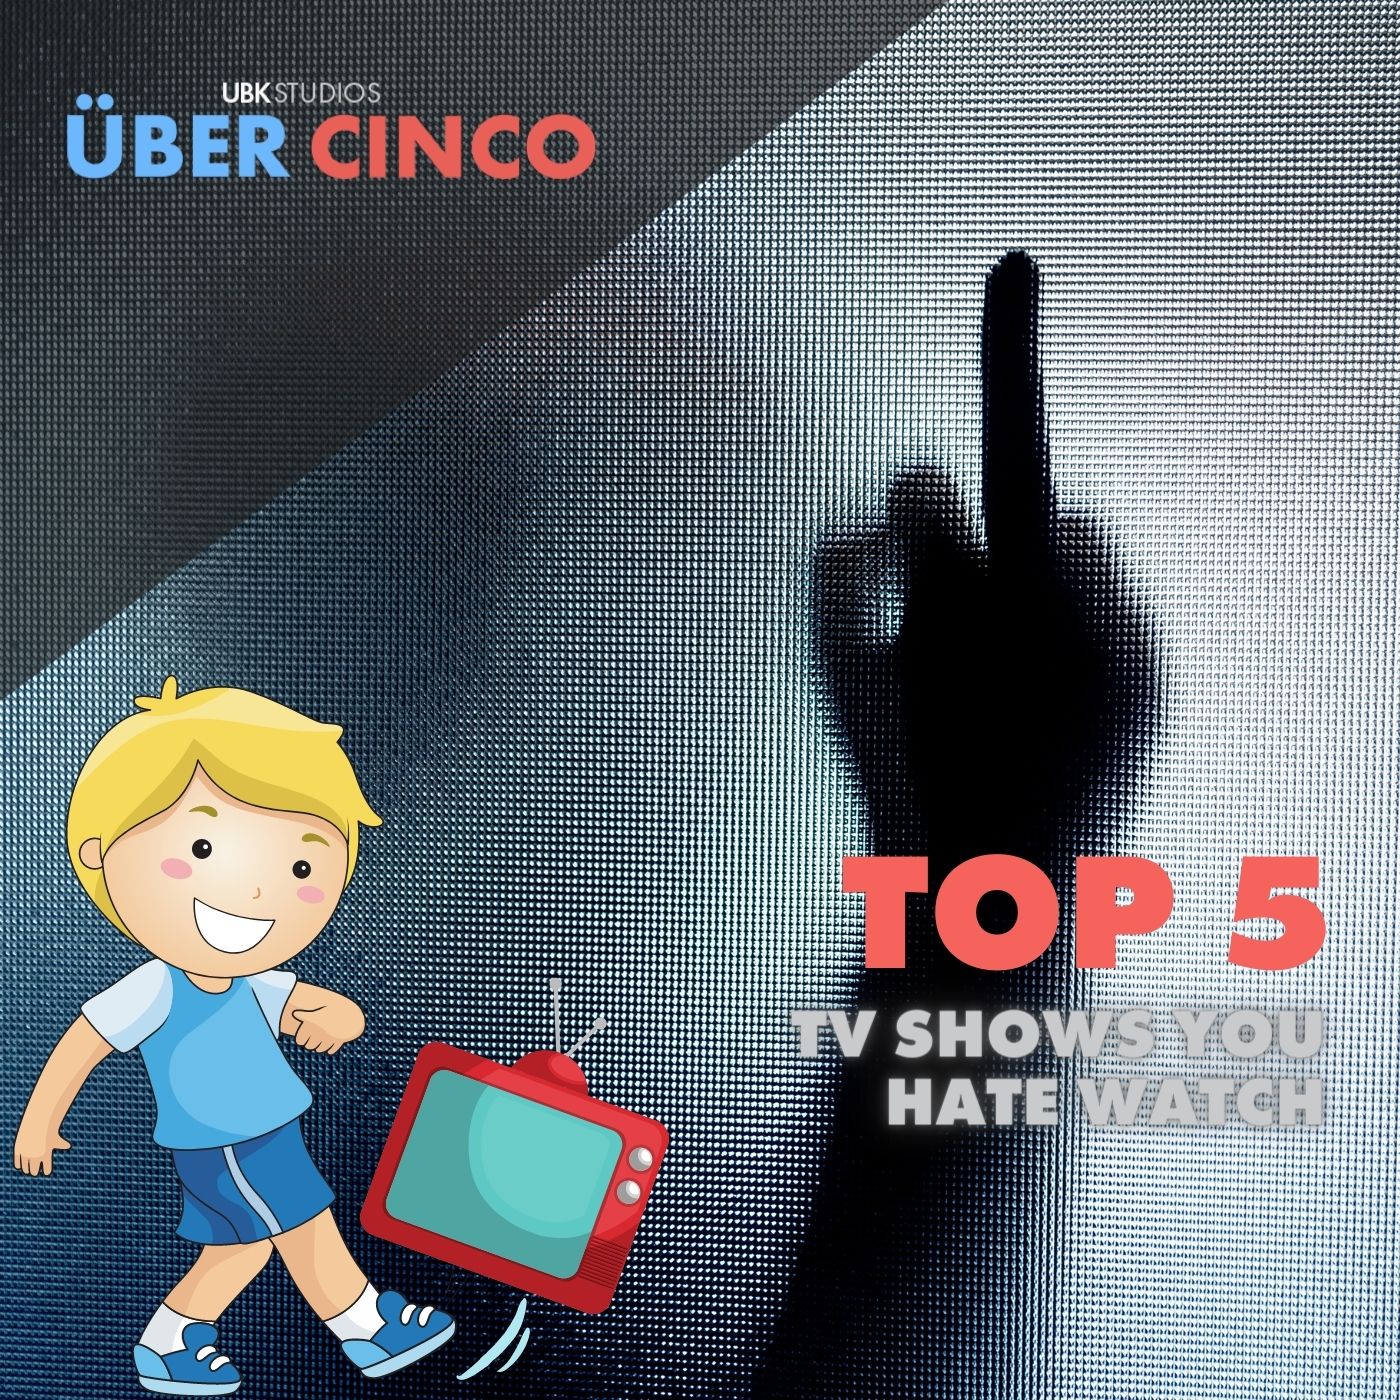 Top 5 TV Shows You Hate-Watch Image